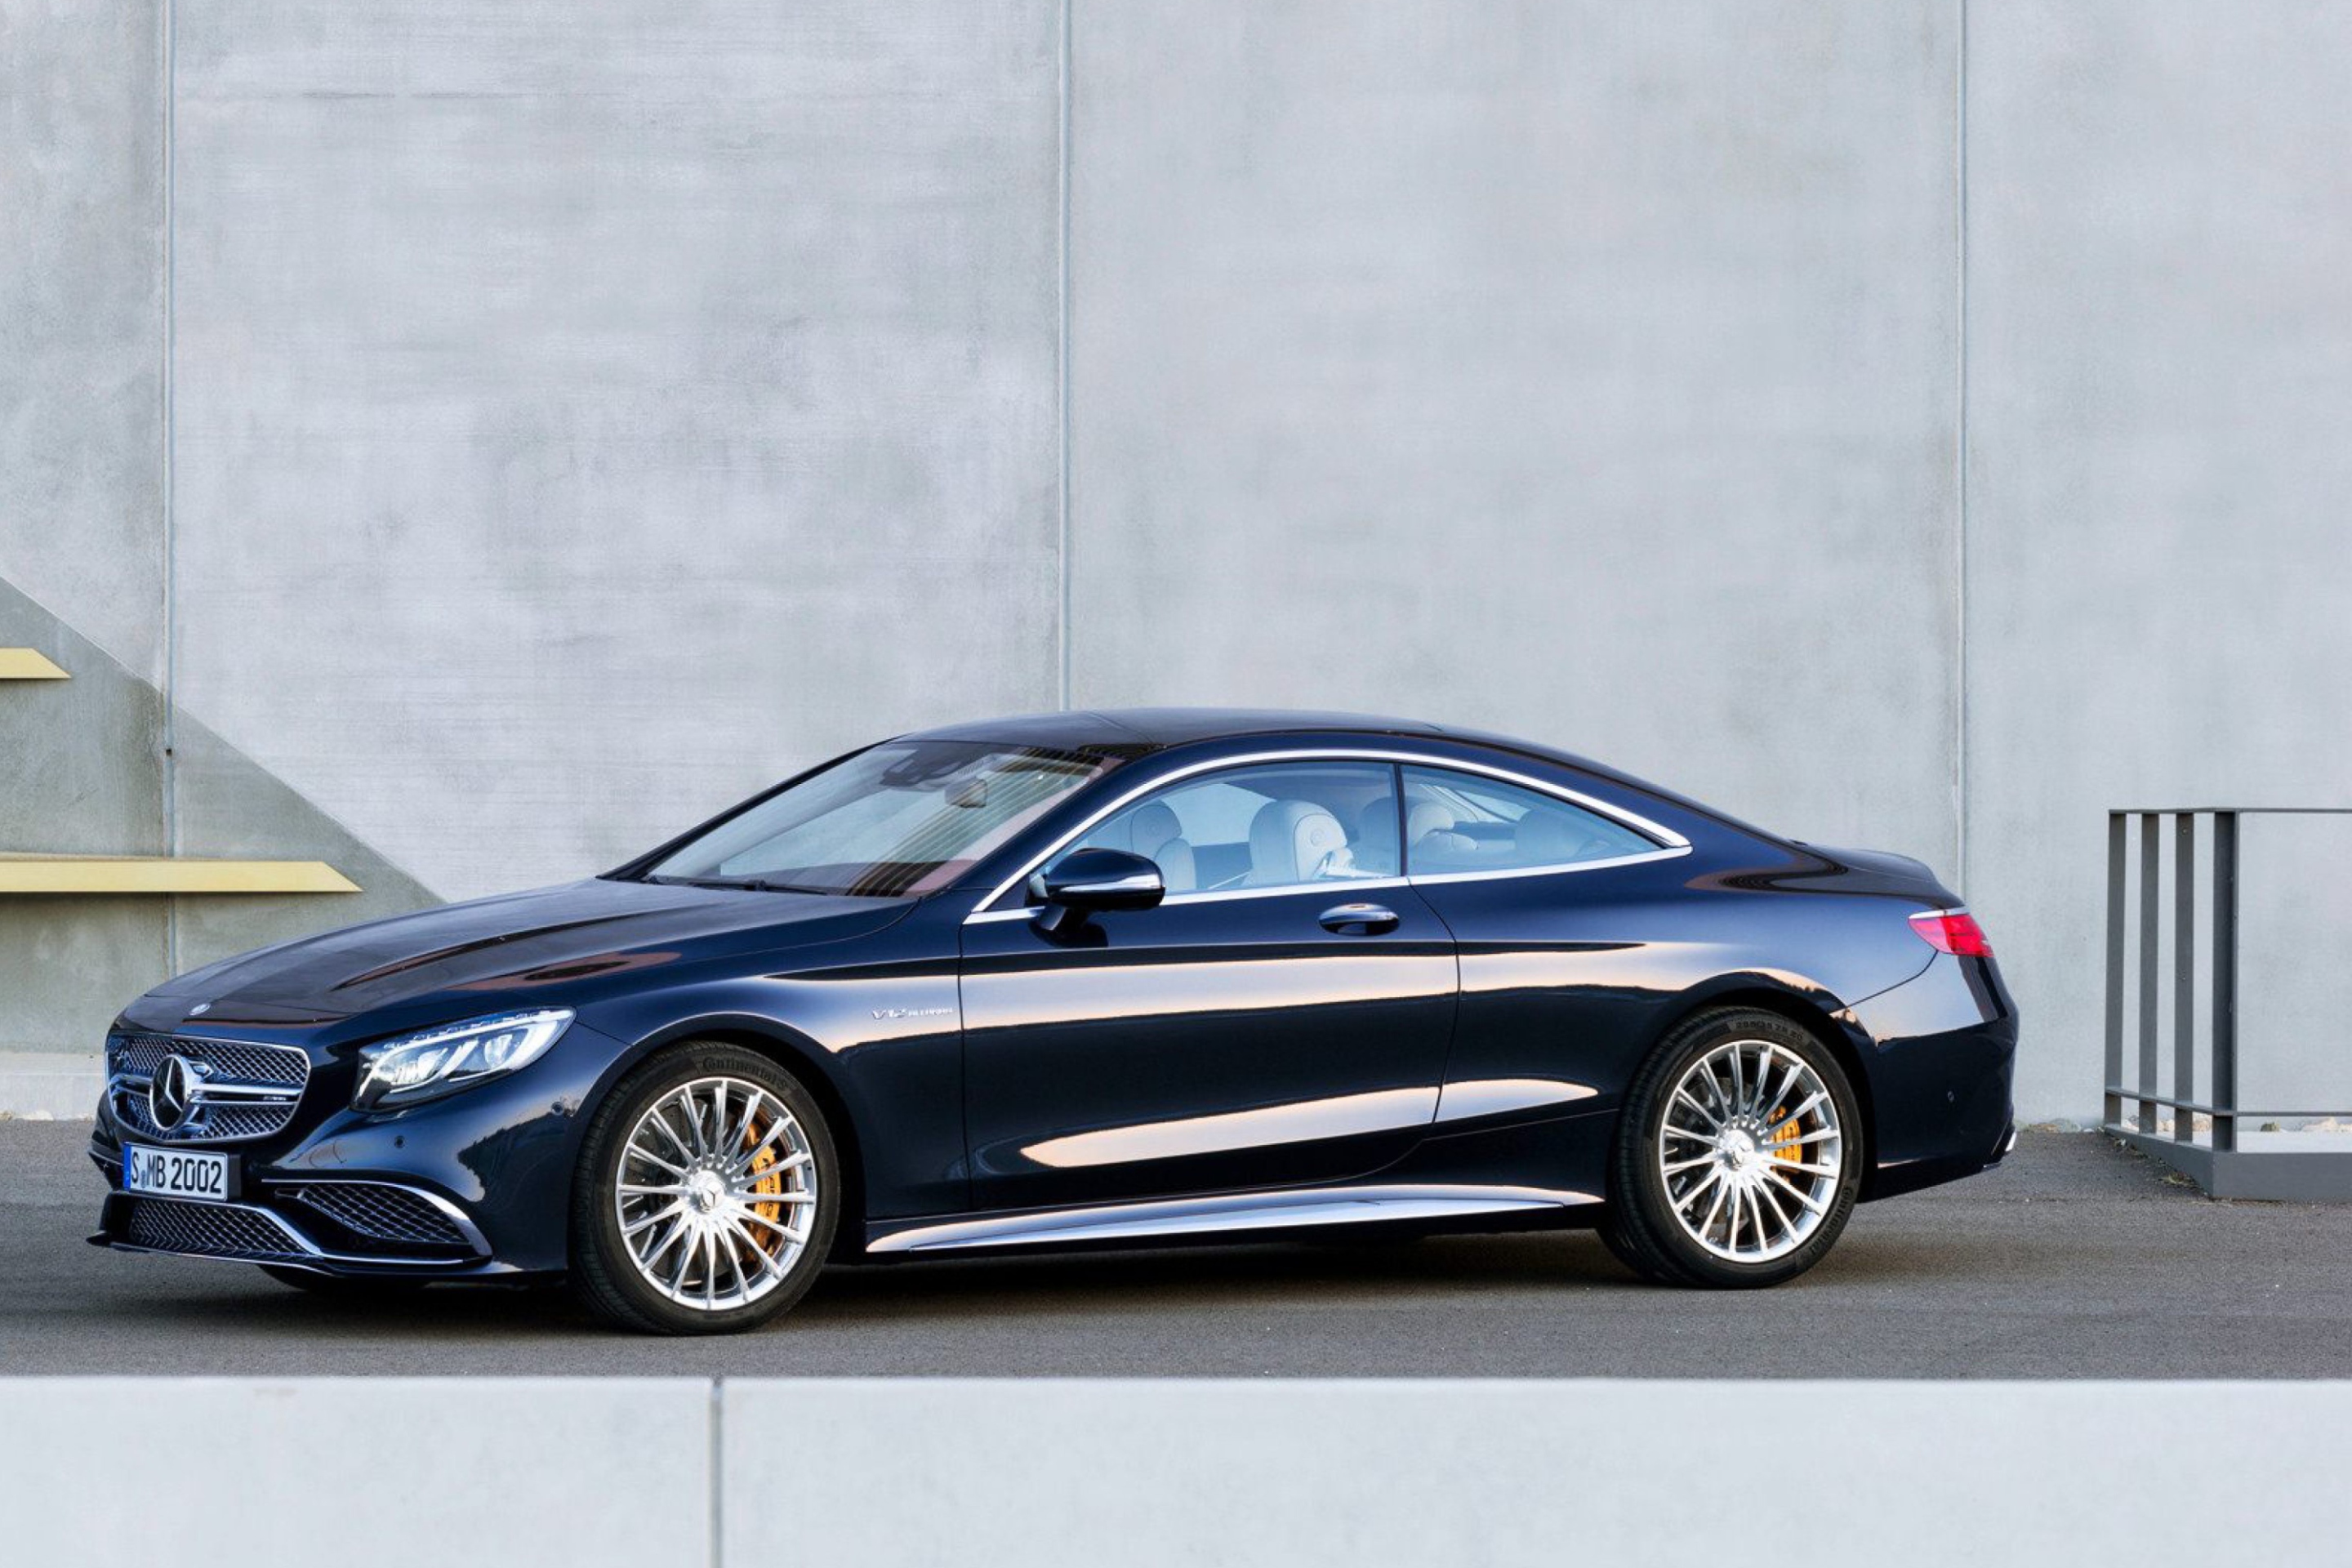 Mercedes-Benz S65 AMG Coupe wallpaper 2880x1920